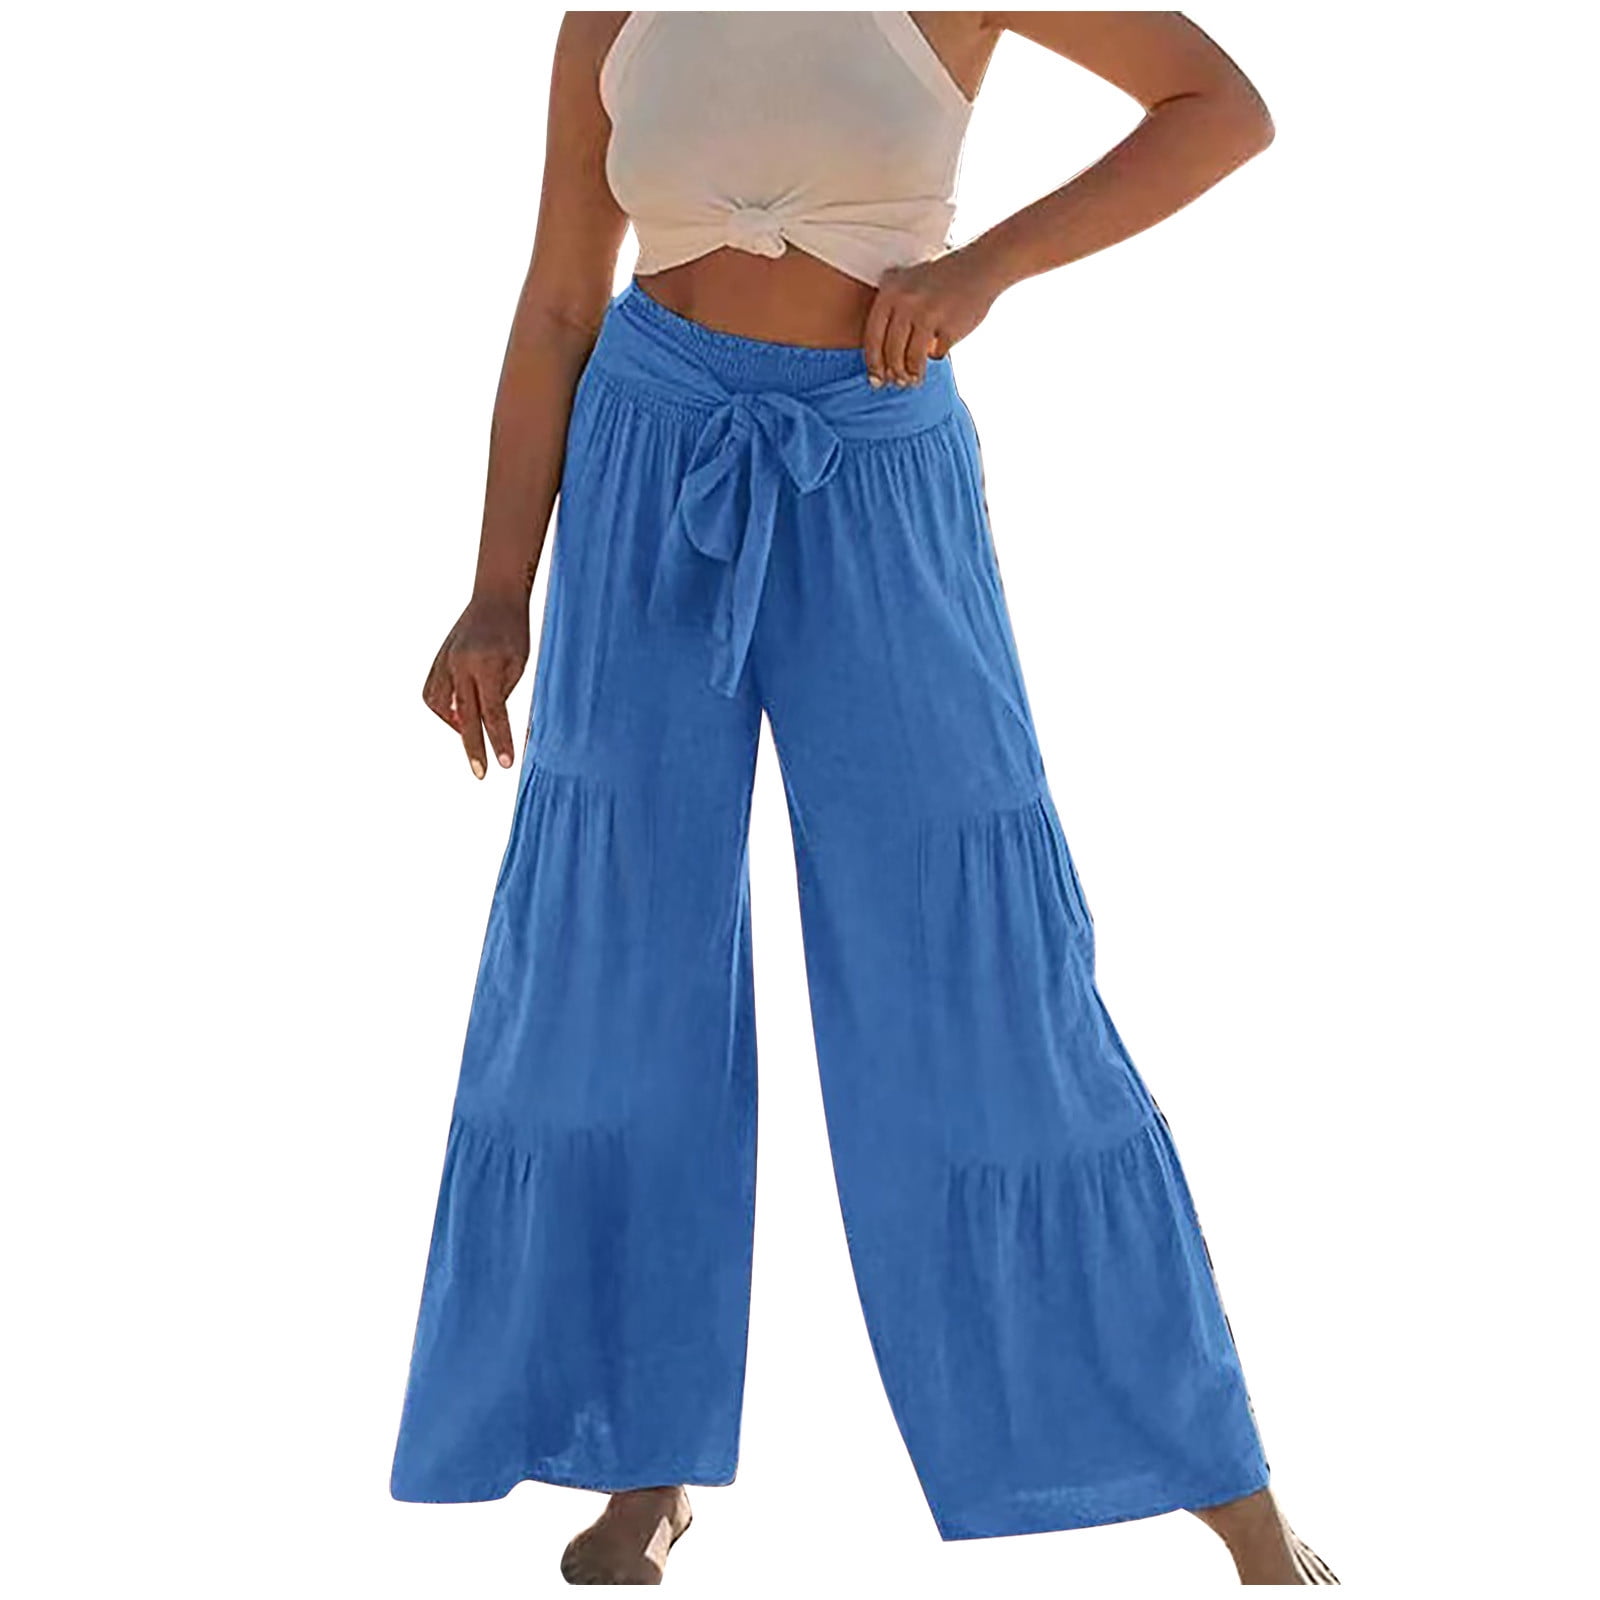 Palazzo Pants for Women Wide Leg High Waist Loose Fit Trousers Casual Flowy  Ruffle Dress Pants with Pockets (Medium, Sky Blue) 